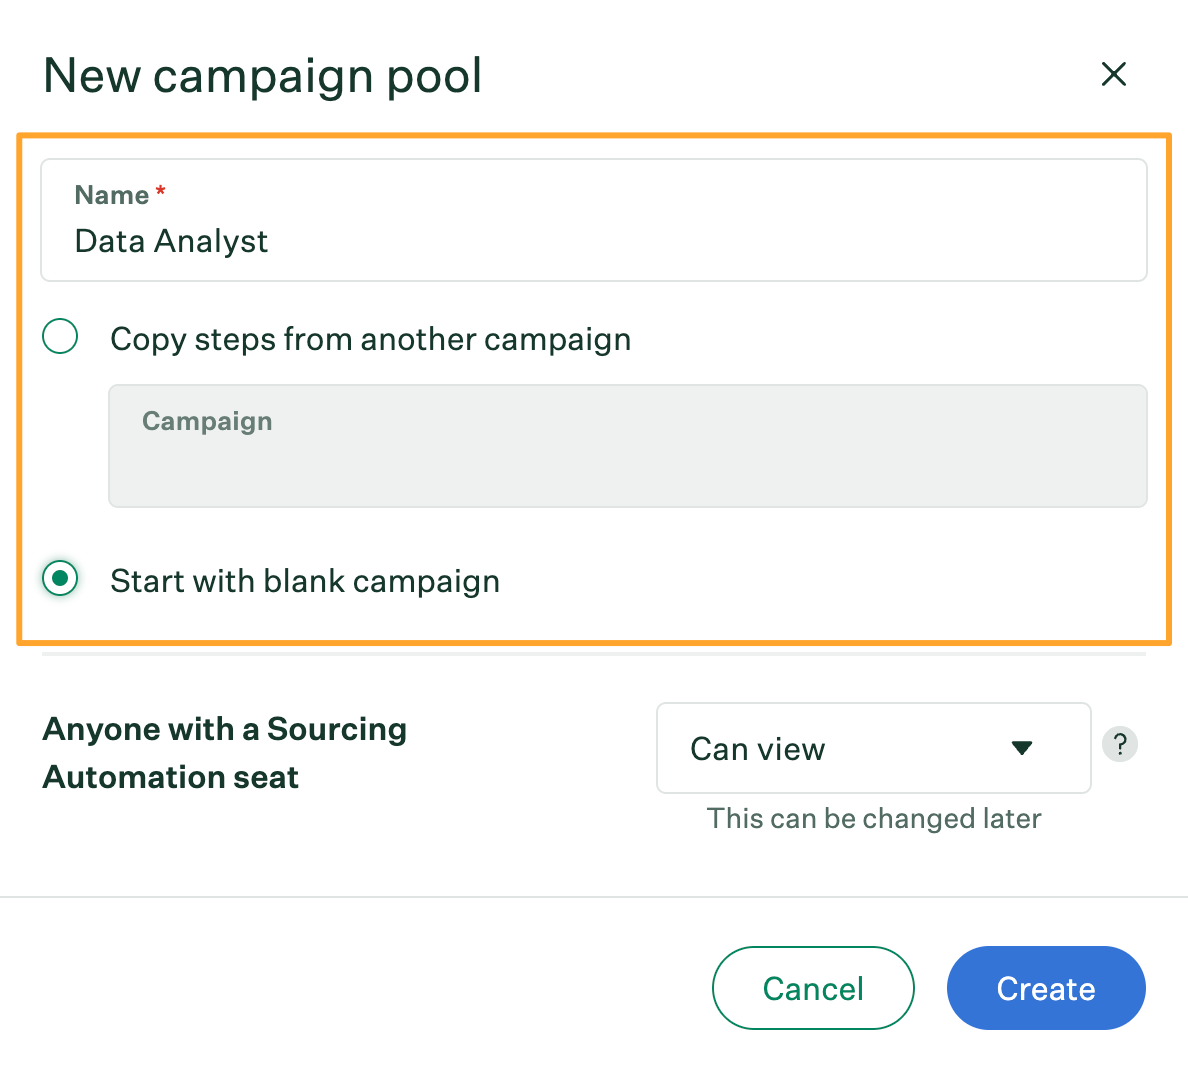 New campaign pool window with name filled out and start with blank campaign option selected